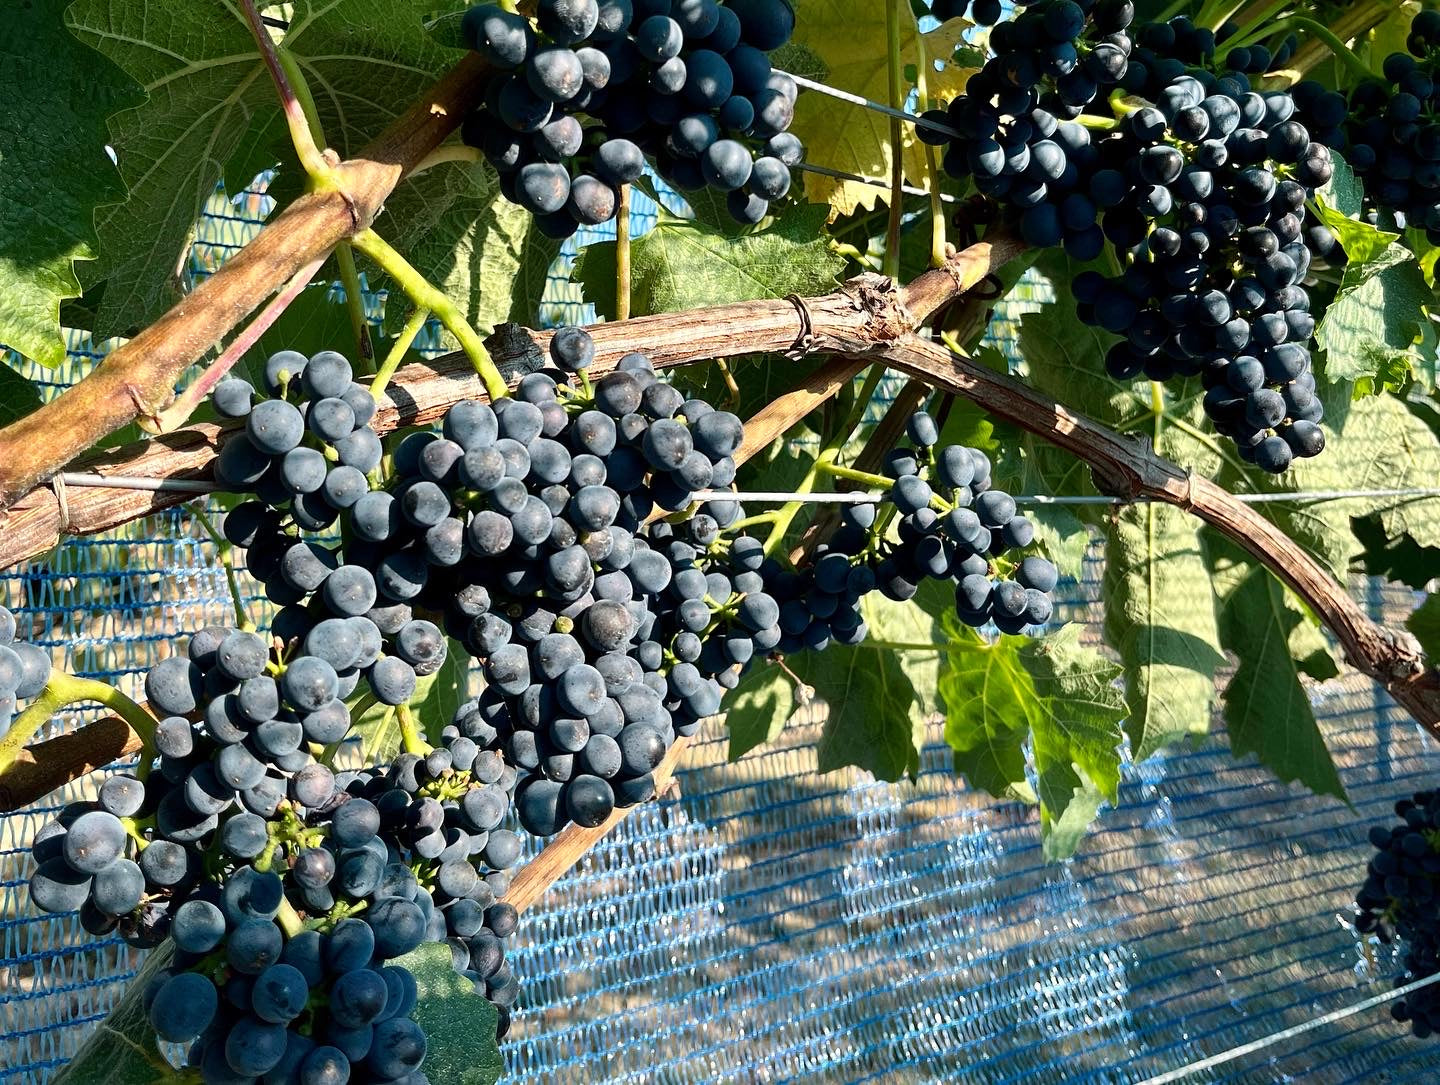 Divico Vines - Swiss Variety producing red wine